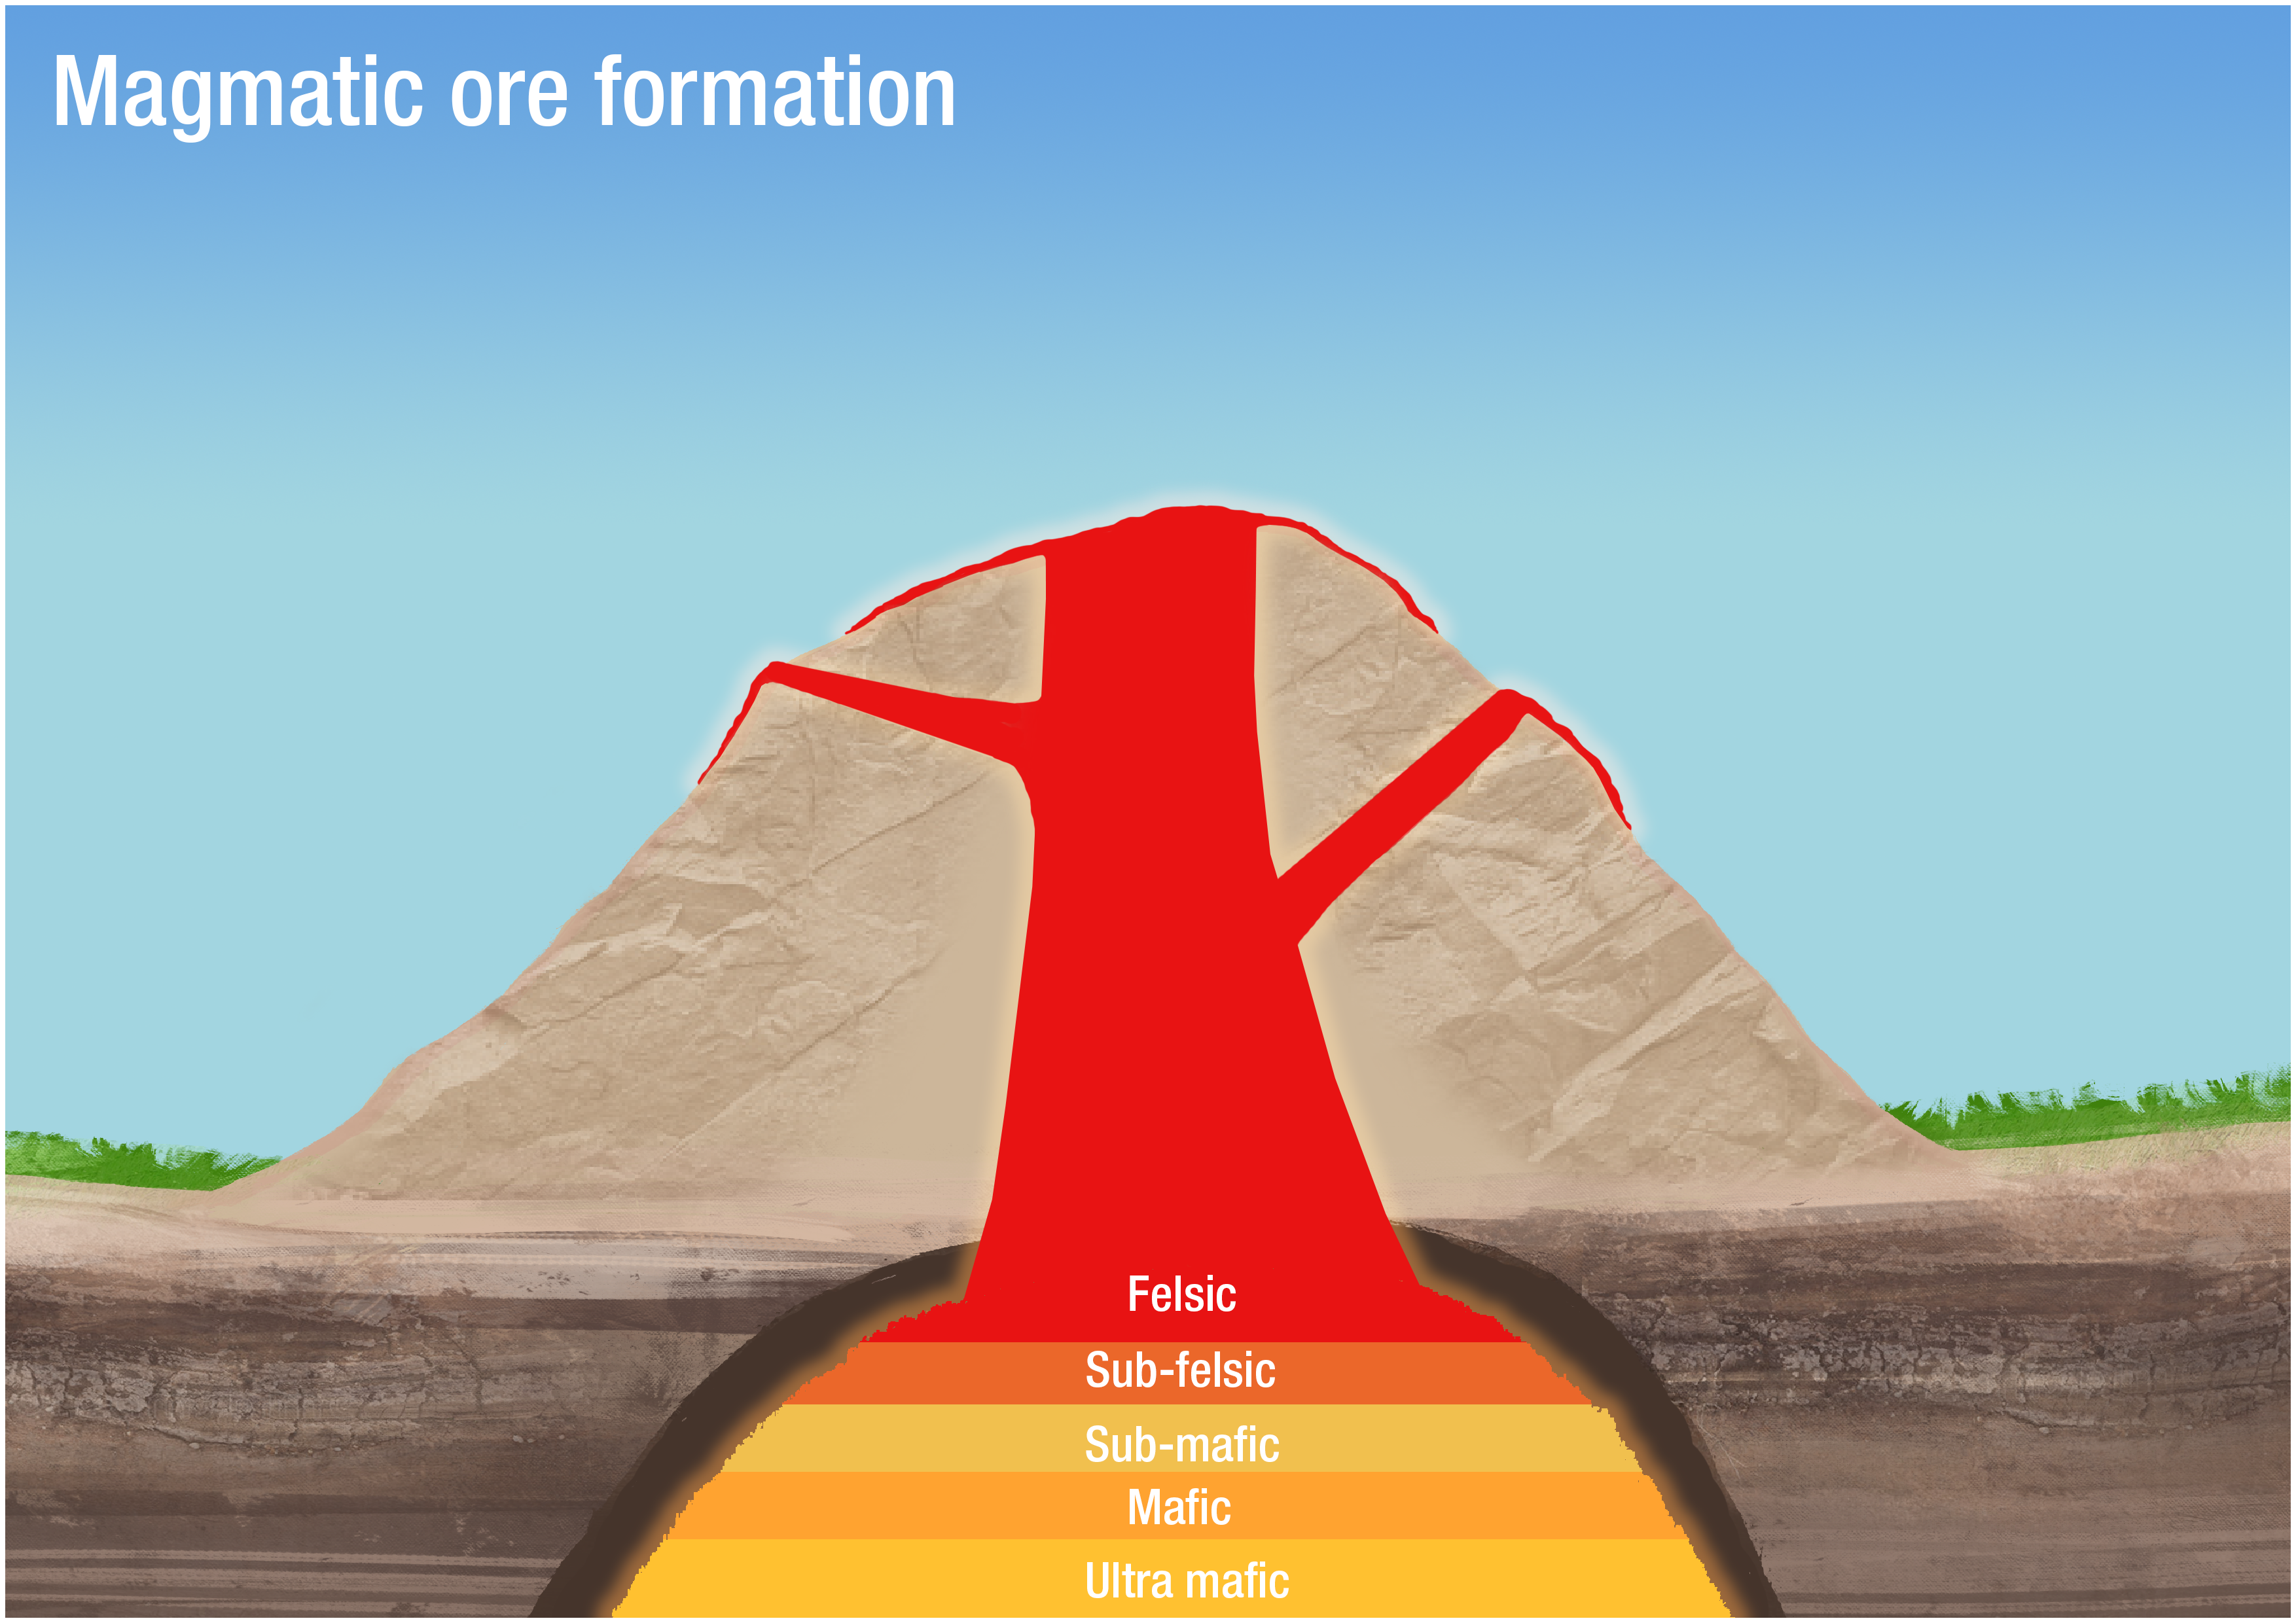 Magmatic ore formation